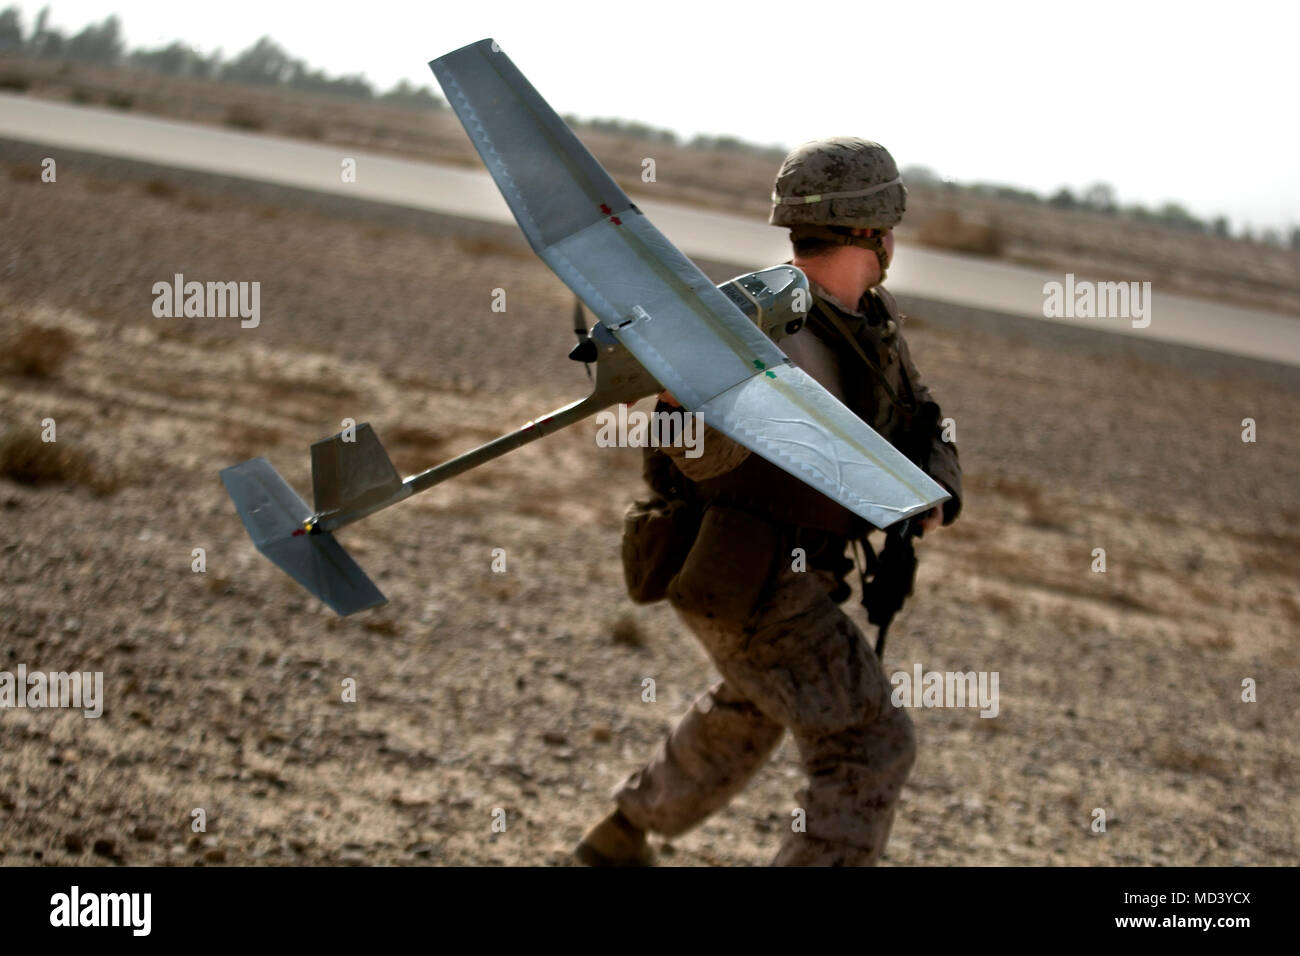 A U.S. Marine with Task Force Southwest (TFSW) tosses a RQ-11B Raven unmanned aerial system (UAS) during a security patrol near Bost Airfield, Afghanistan, March 12, 2018. Marines with TFSW use UAS assets to assist the Afghan National Defense and Security Forces in surveillance operations to increase their combined capabilities in Helmand province. (U.S. Marine Corps photo by Sgt. Sean J. Berry) Stock Photo